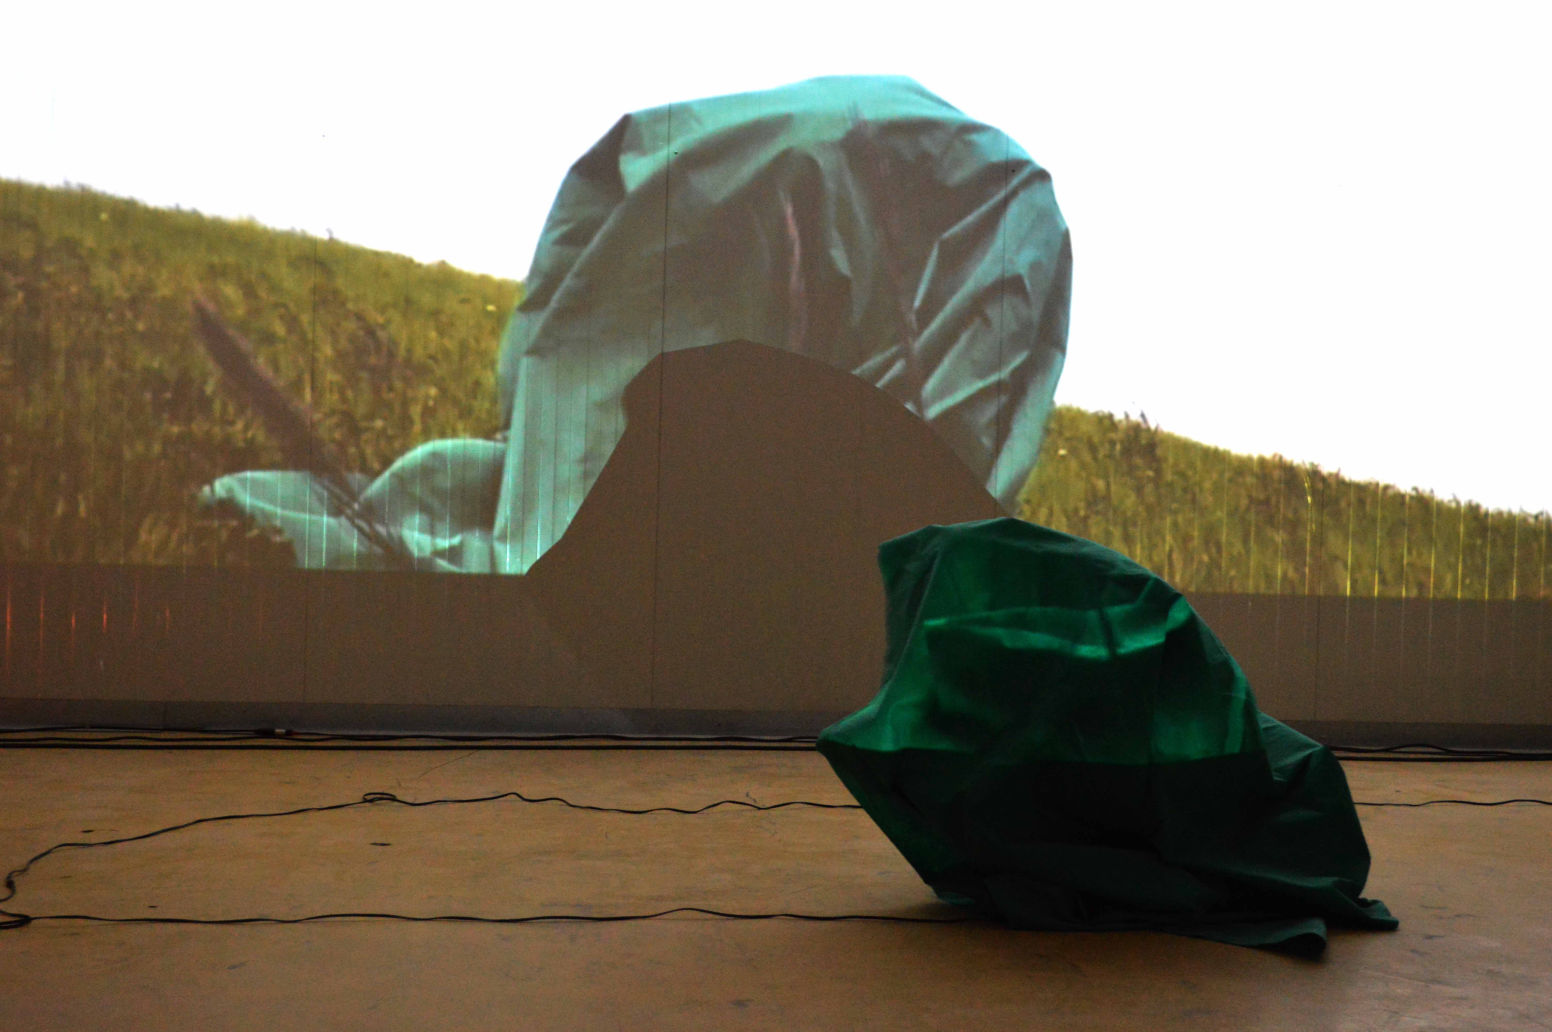 Resguardo y Presencia (Shelter and Presence), since 2012 Performance, Video, Photography, Installation